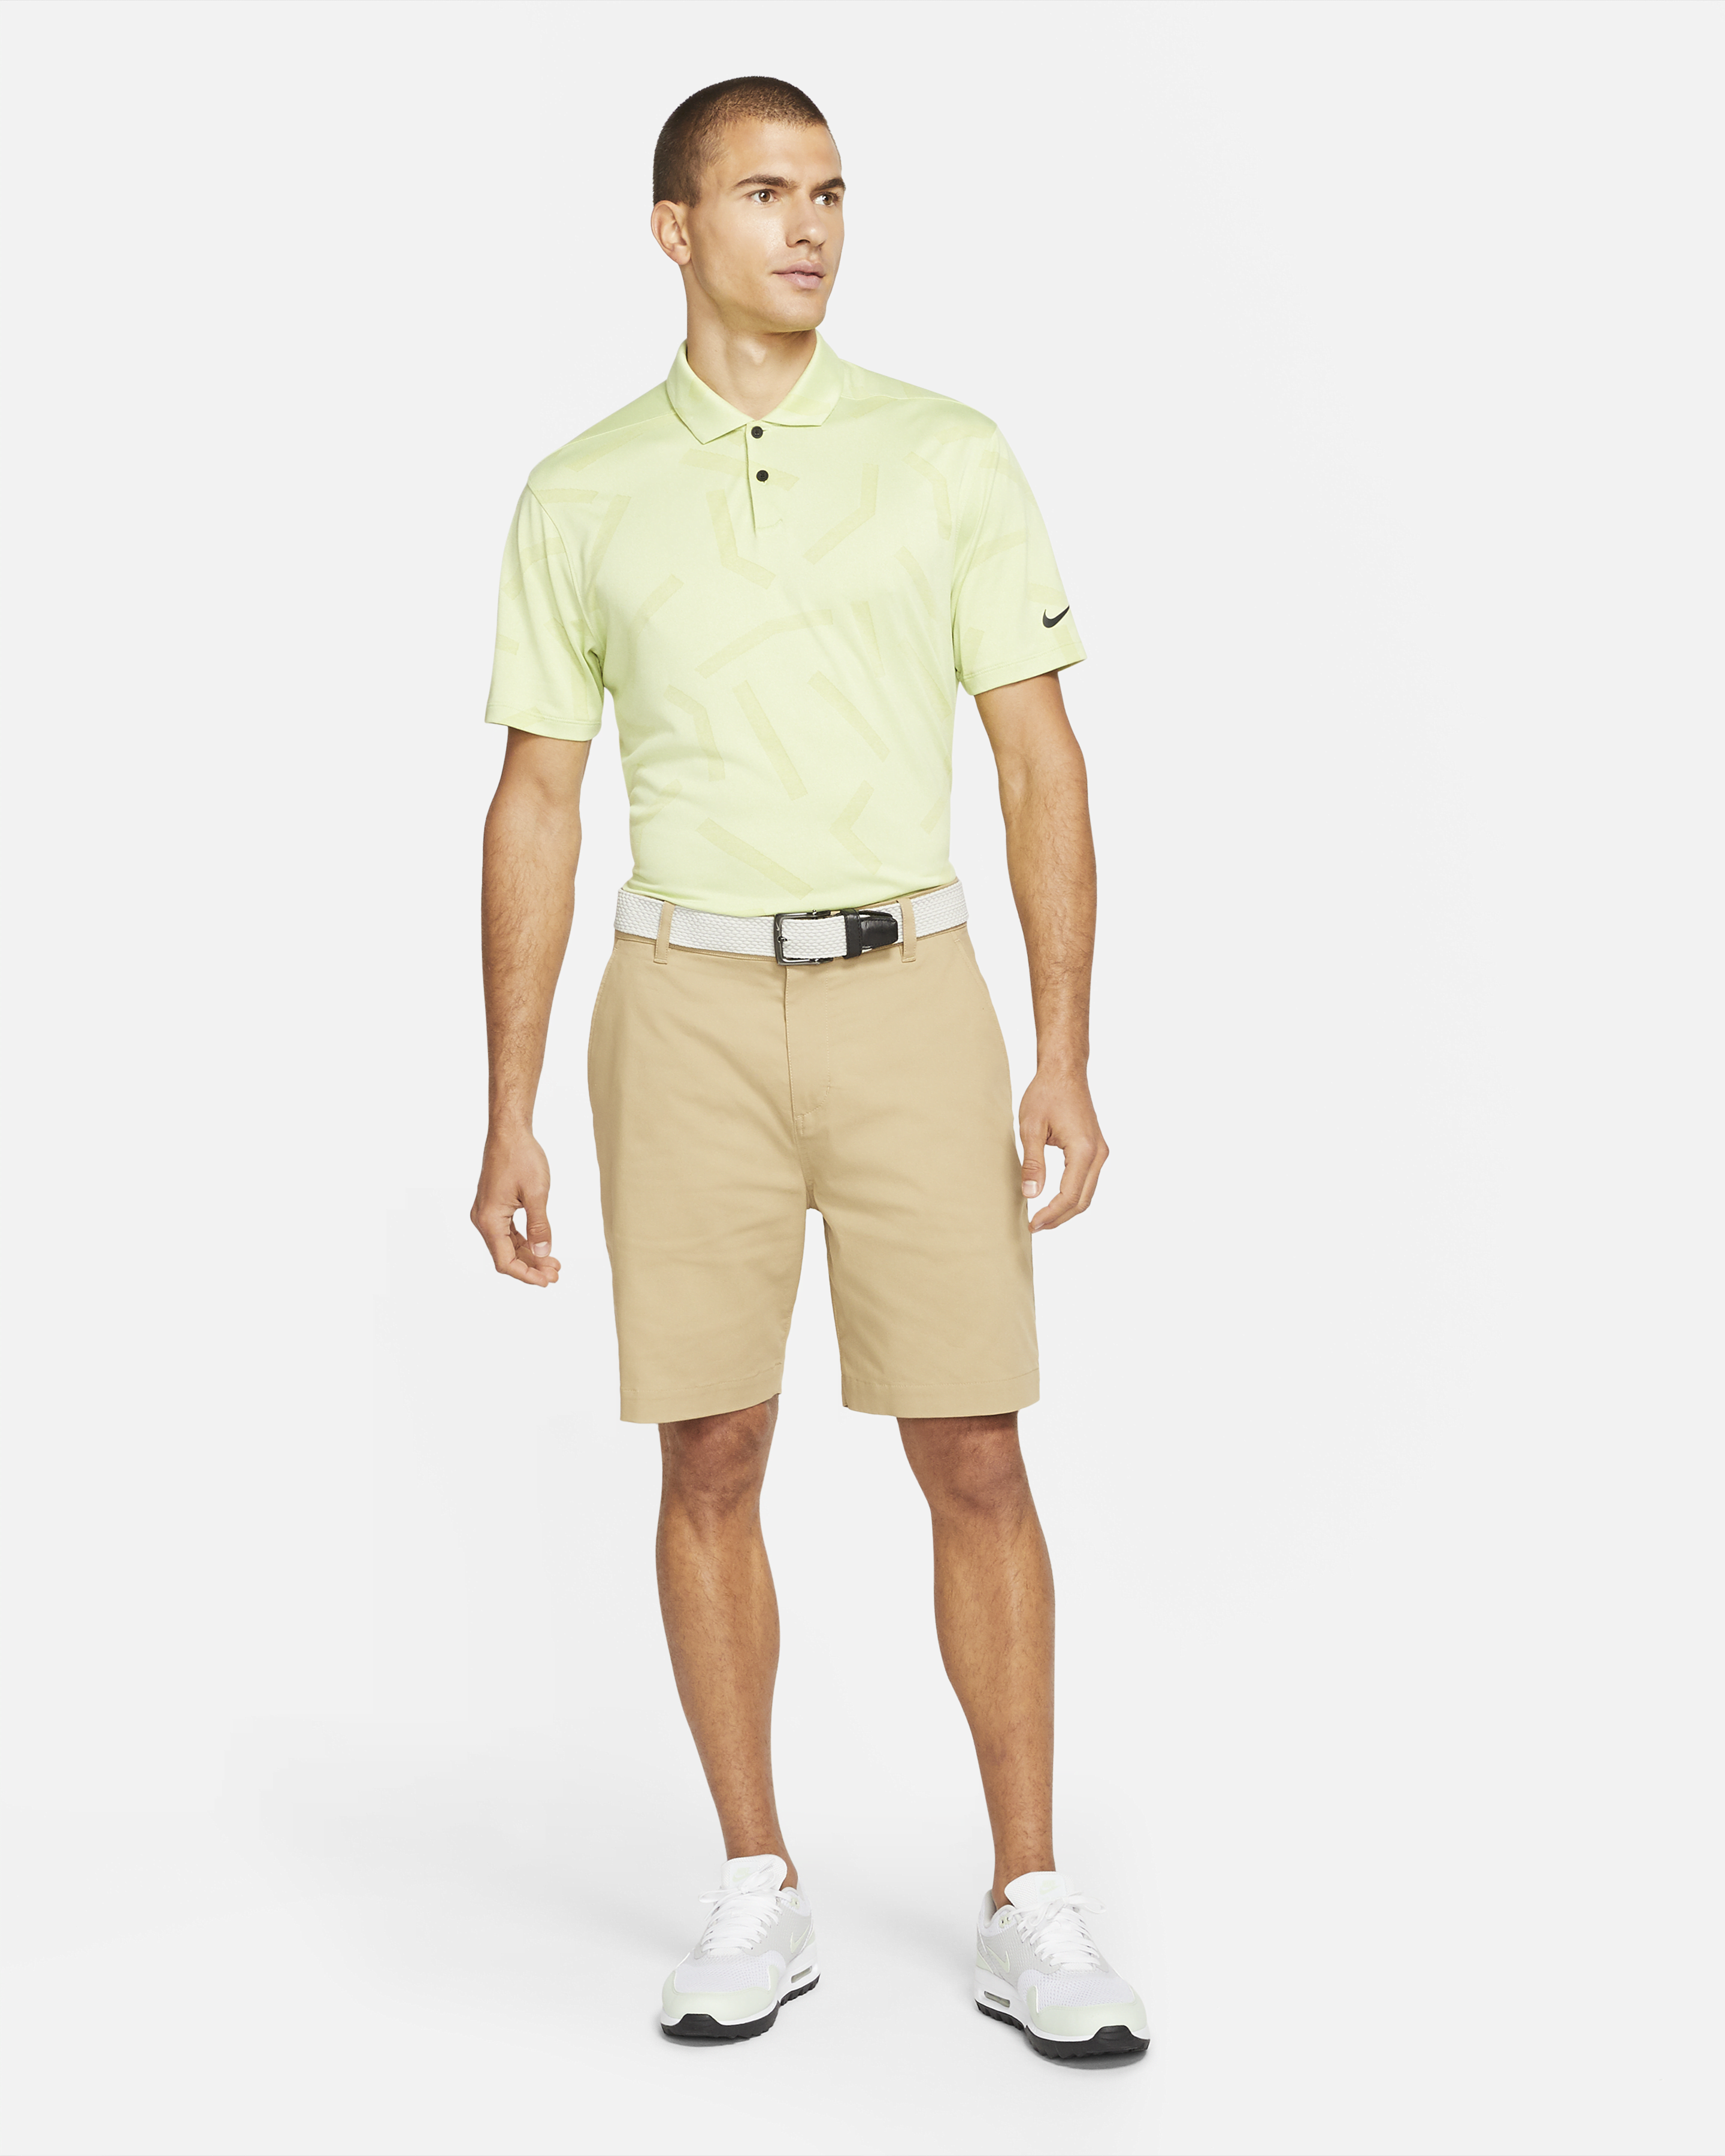 Best golf shorts 2023: Nike, Adidas, Under Armour shorts and more